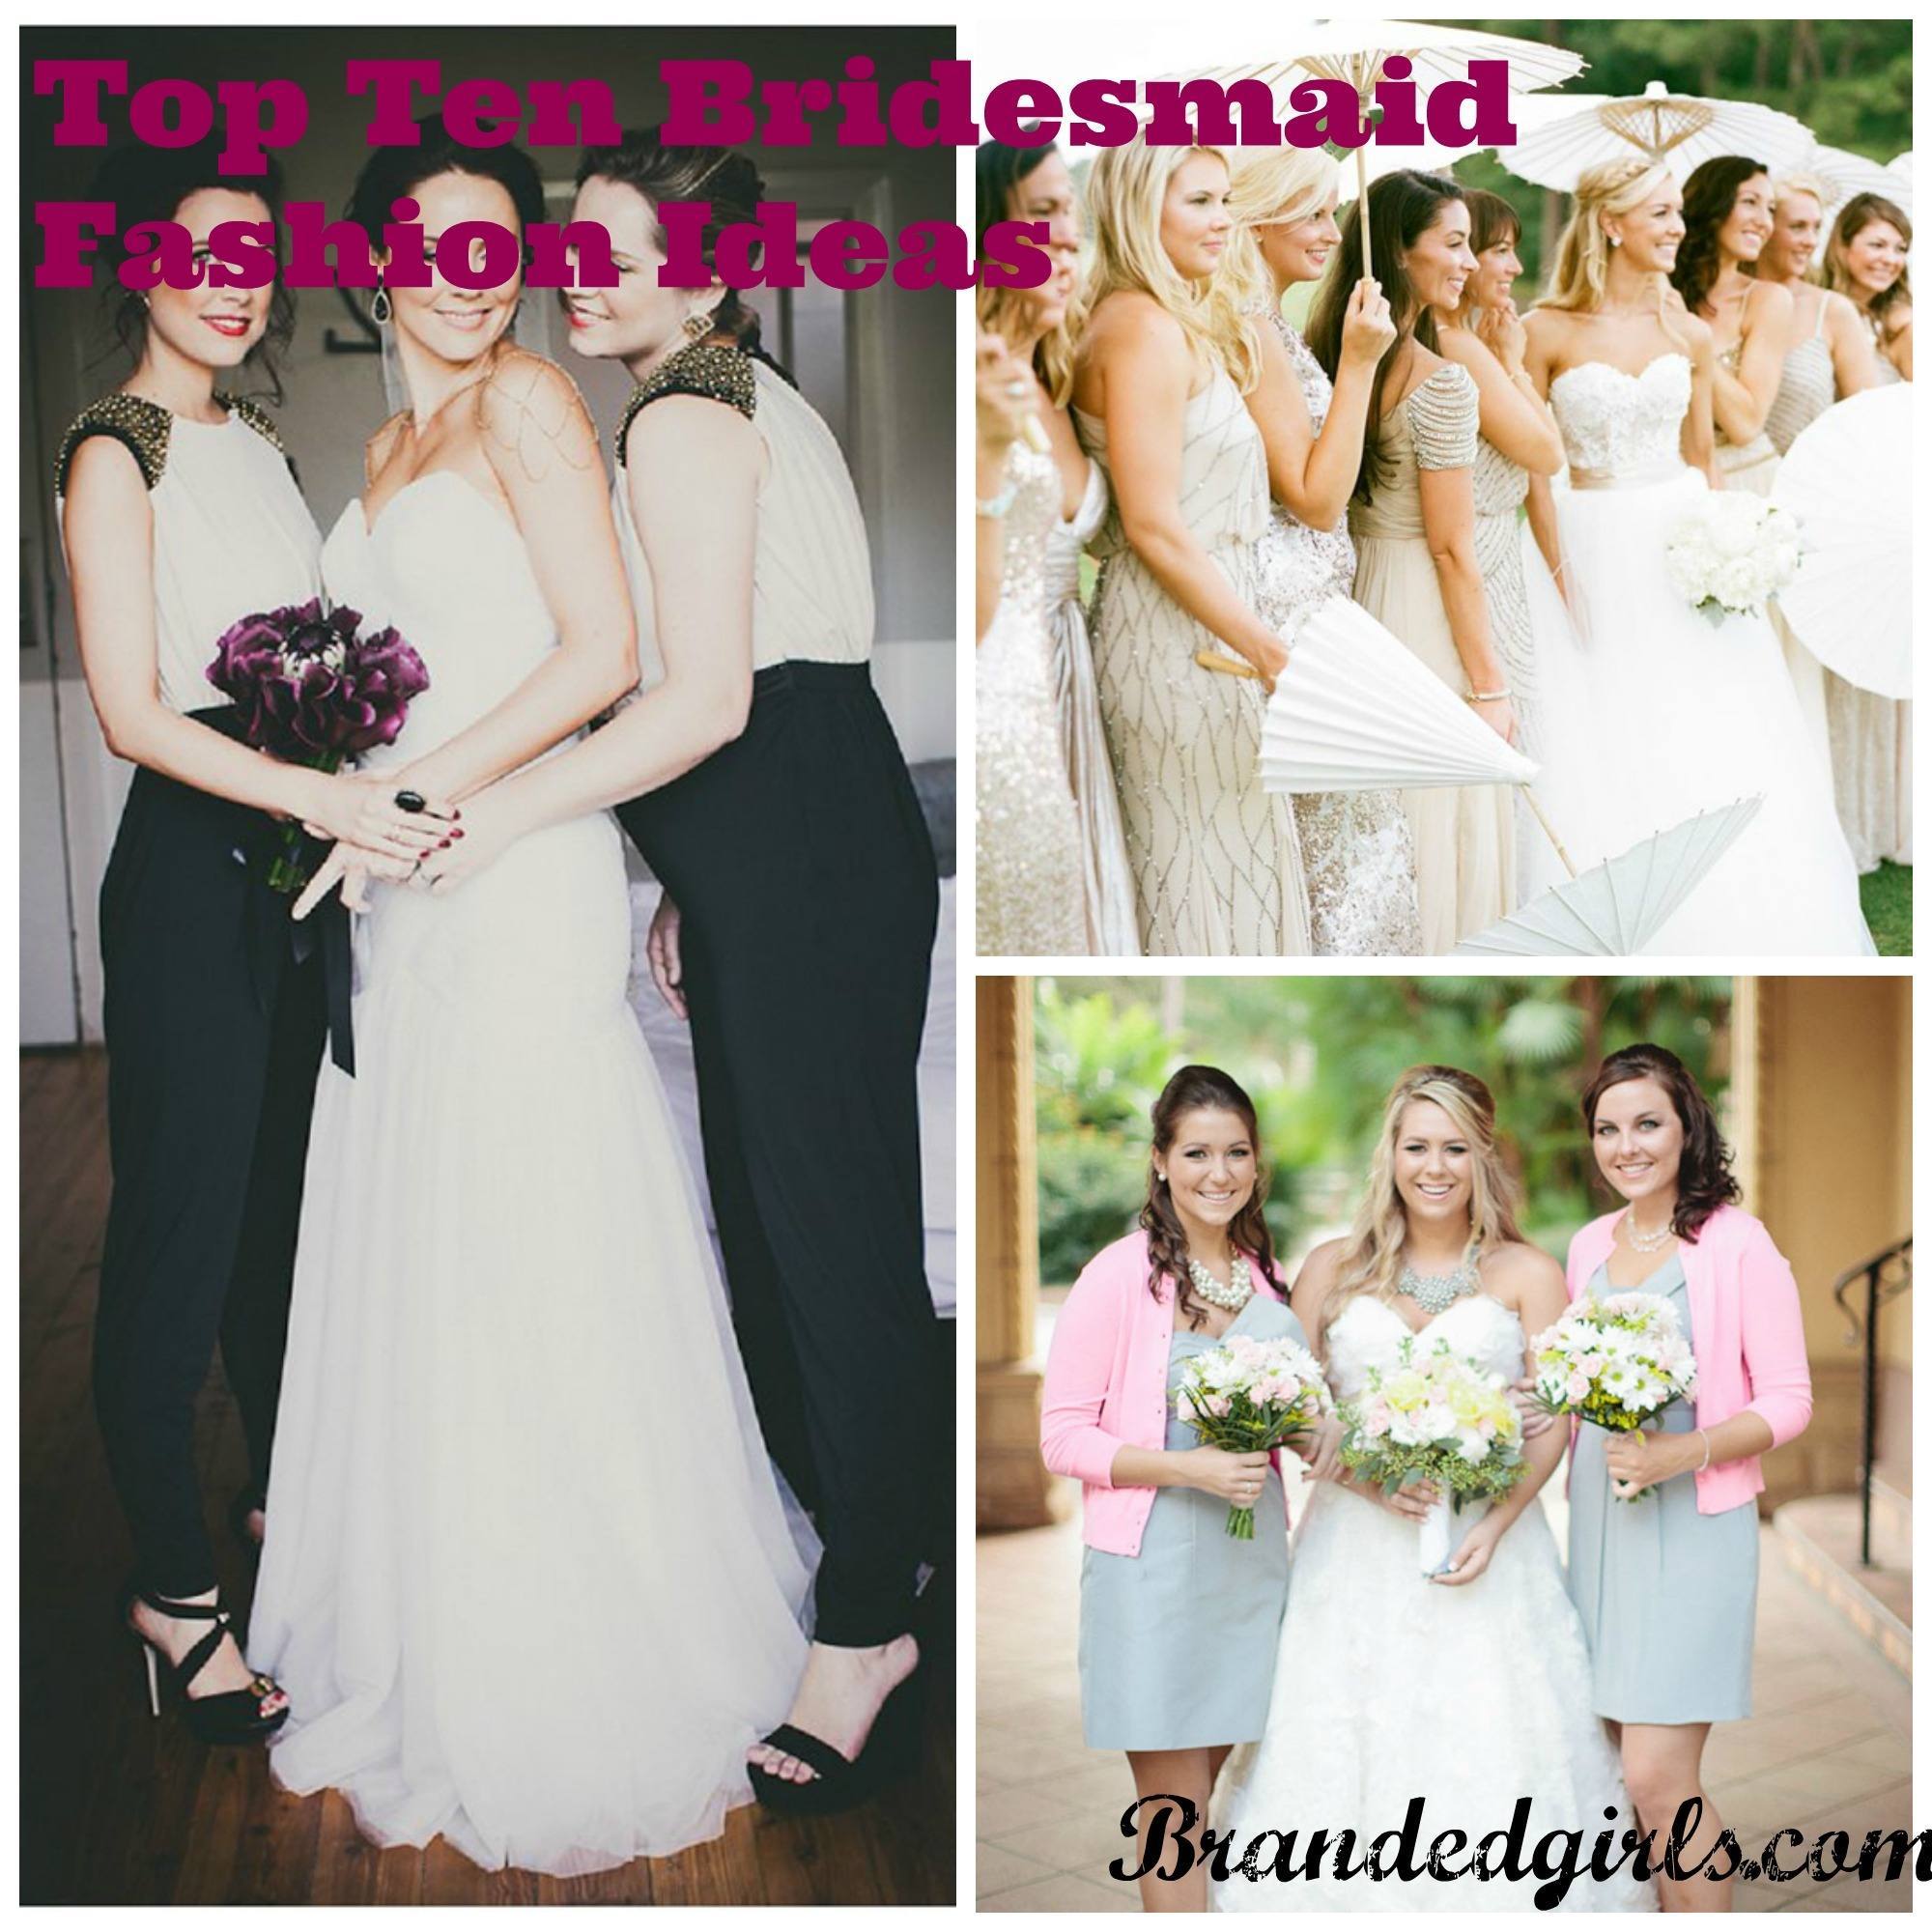 Bridesmaid Outfit Ideas for 2021- What to Wear as Bridesmaid